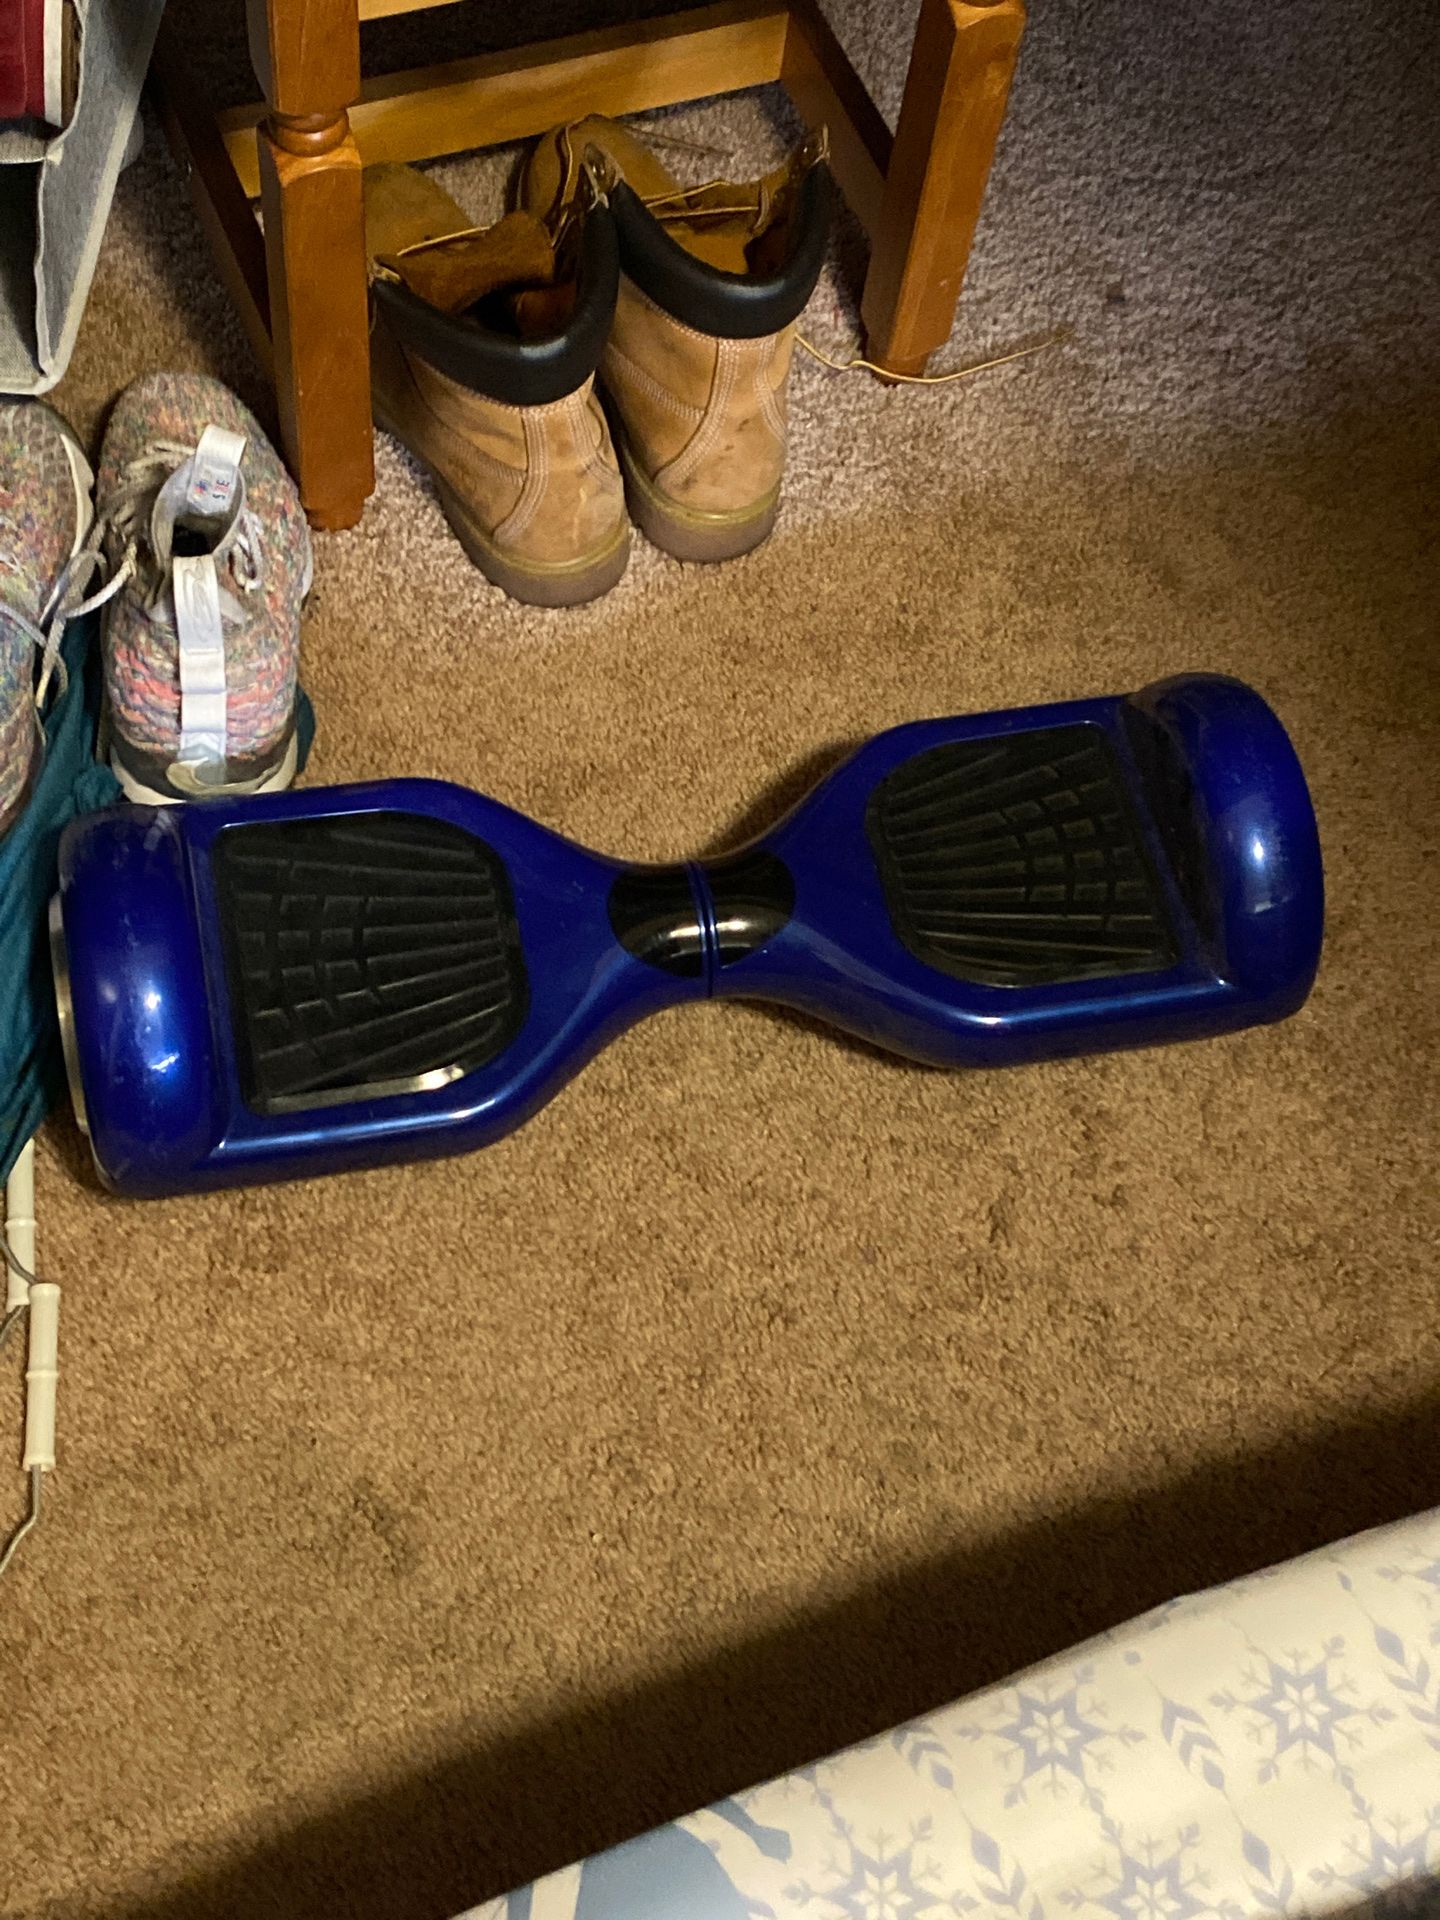 Hoverboard for sale no charger